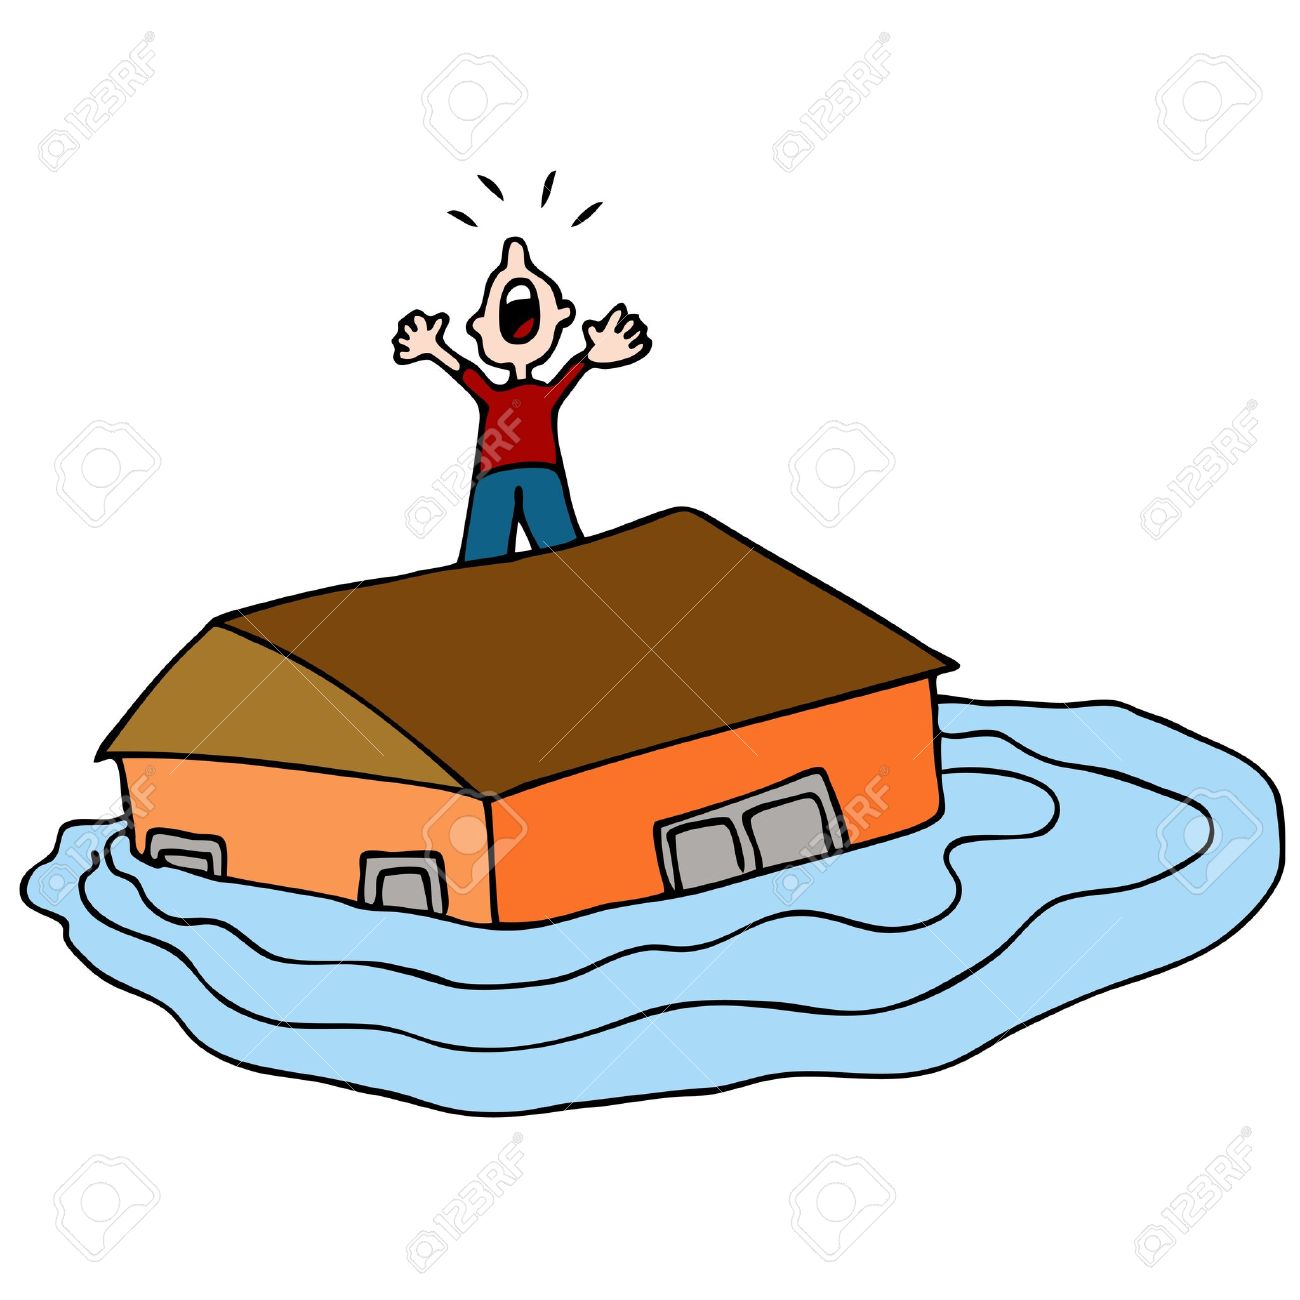 Flooding clipart free.